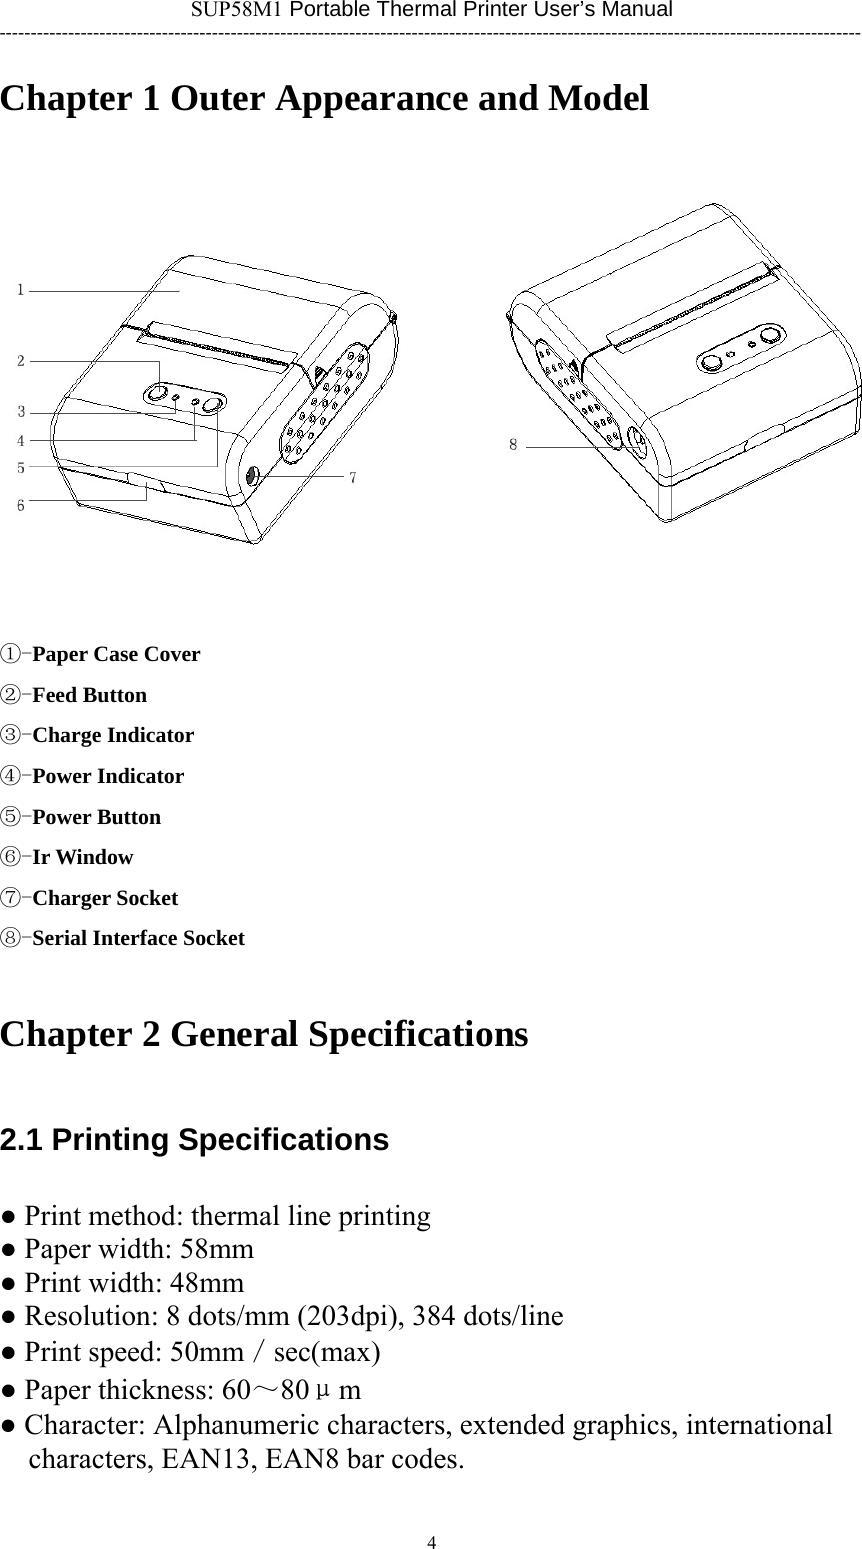 SUP58M1 Portable Thermal Printer User’s Manual ------------------------------------------------------------------------------------------------------------------------------------------ Chapter 1 Outer Appearance and Model   ①-Paper Case Cover ②-Feed Button ③-Charge Indicator ④-Power Indicator ⑤-Power Button ⑥-Ir Window ⑦-Charger Socket ⑧-Serial Interface Socket Chapter 2 General Specifications 2.1 Printing Specifications ● Print method: thermal line printing ● Paper width: 58mm ● Print width: 48mm ● Resolution: 8 dots/mm (203dpi), 384 dots/line ● Print speed: 50mm／sec(max) ● Paper thickness: 60～80μm ● Character: Alphanumeric characters, extended graphics, international characters, EAN13, EAN8 bar codes.  4      